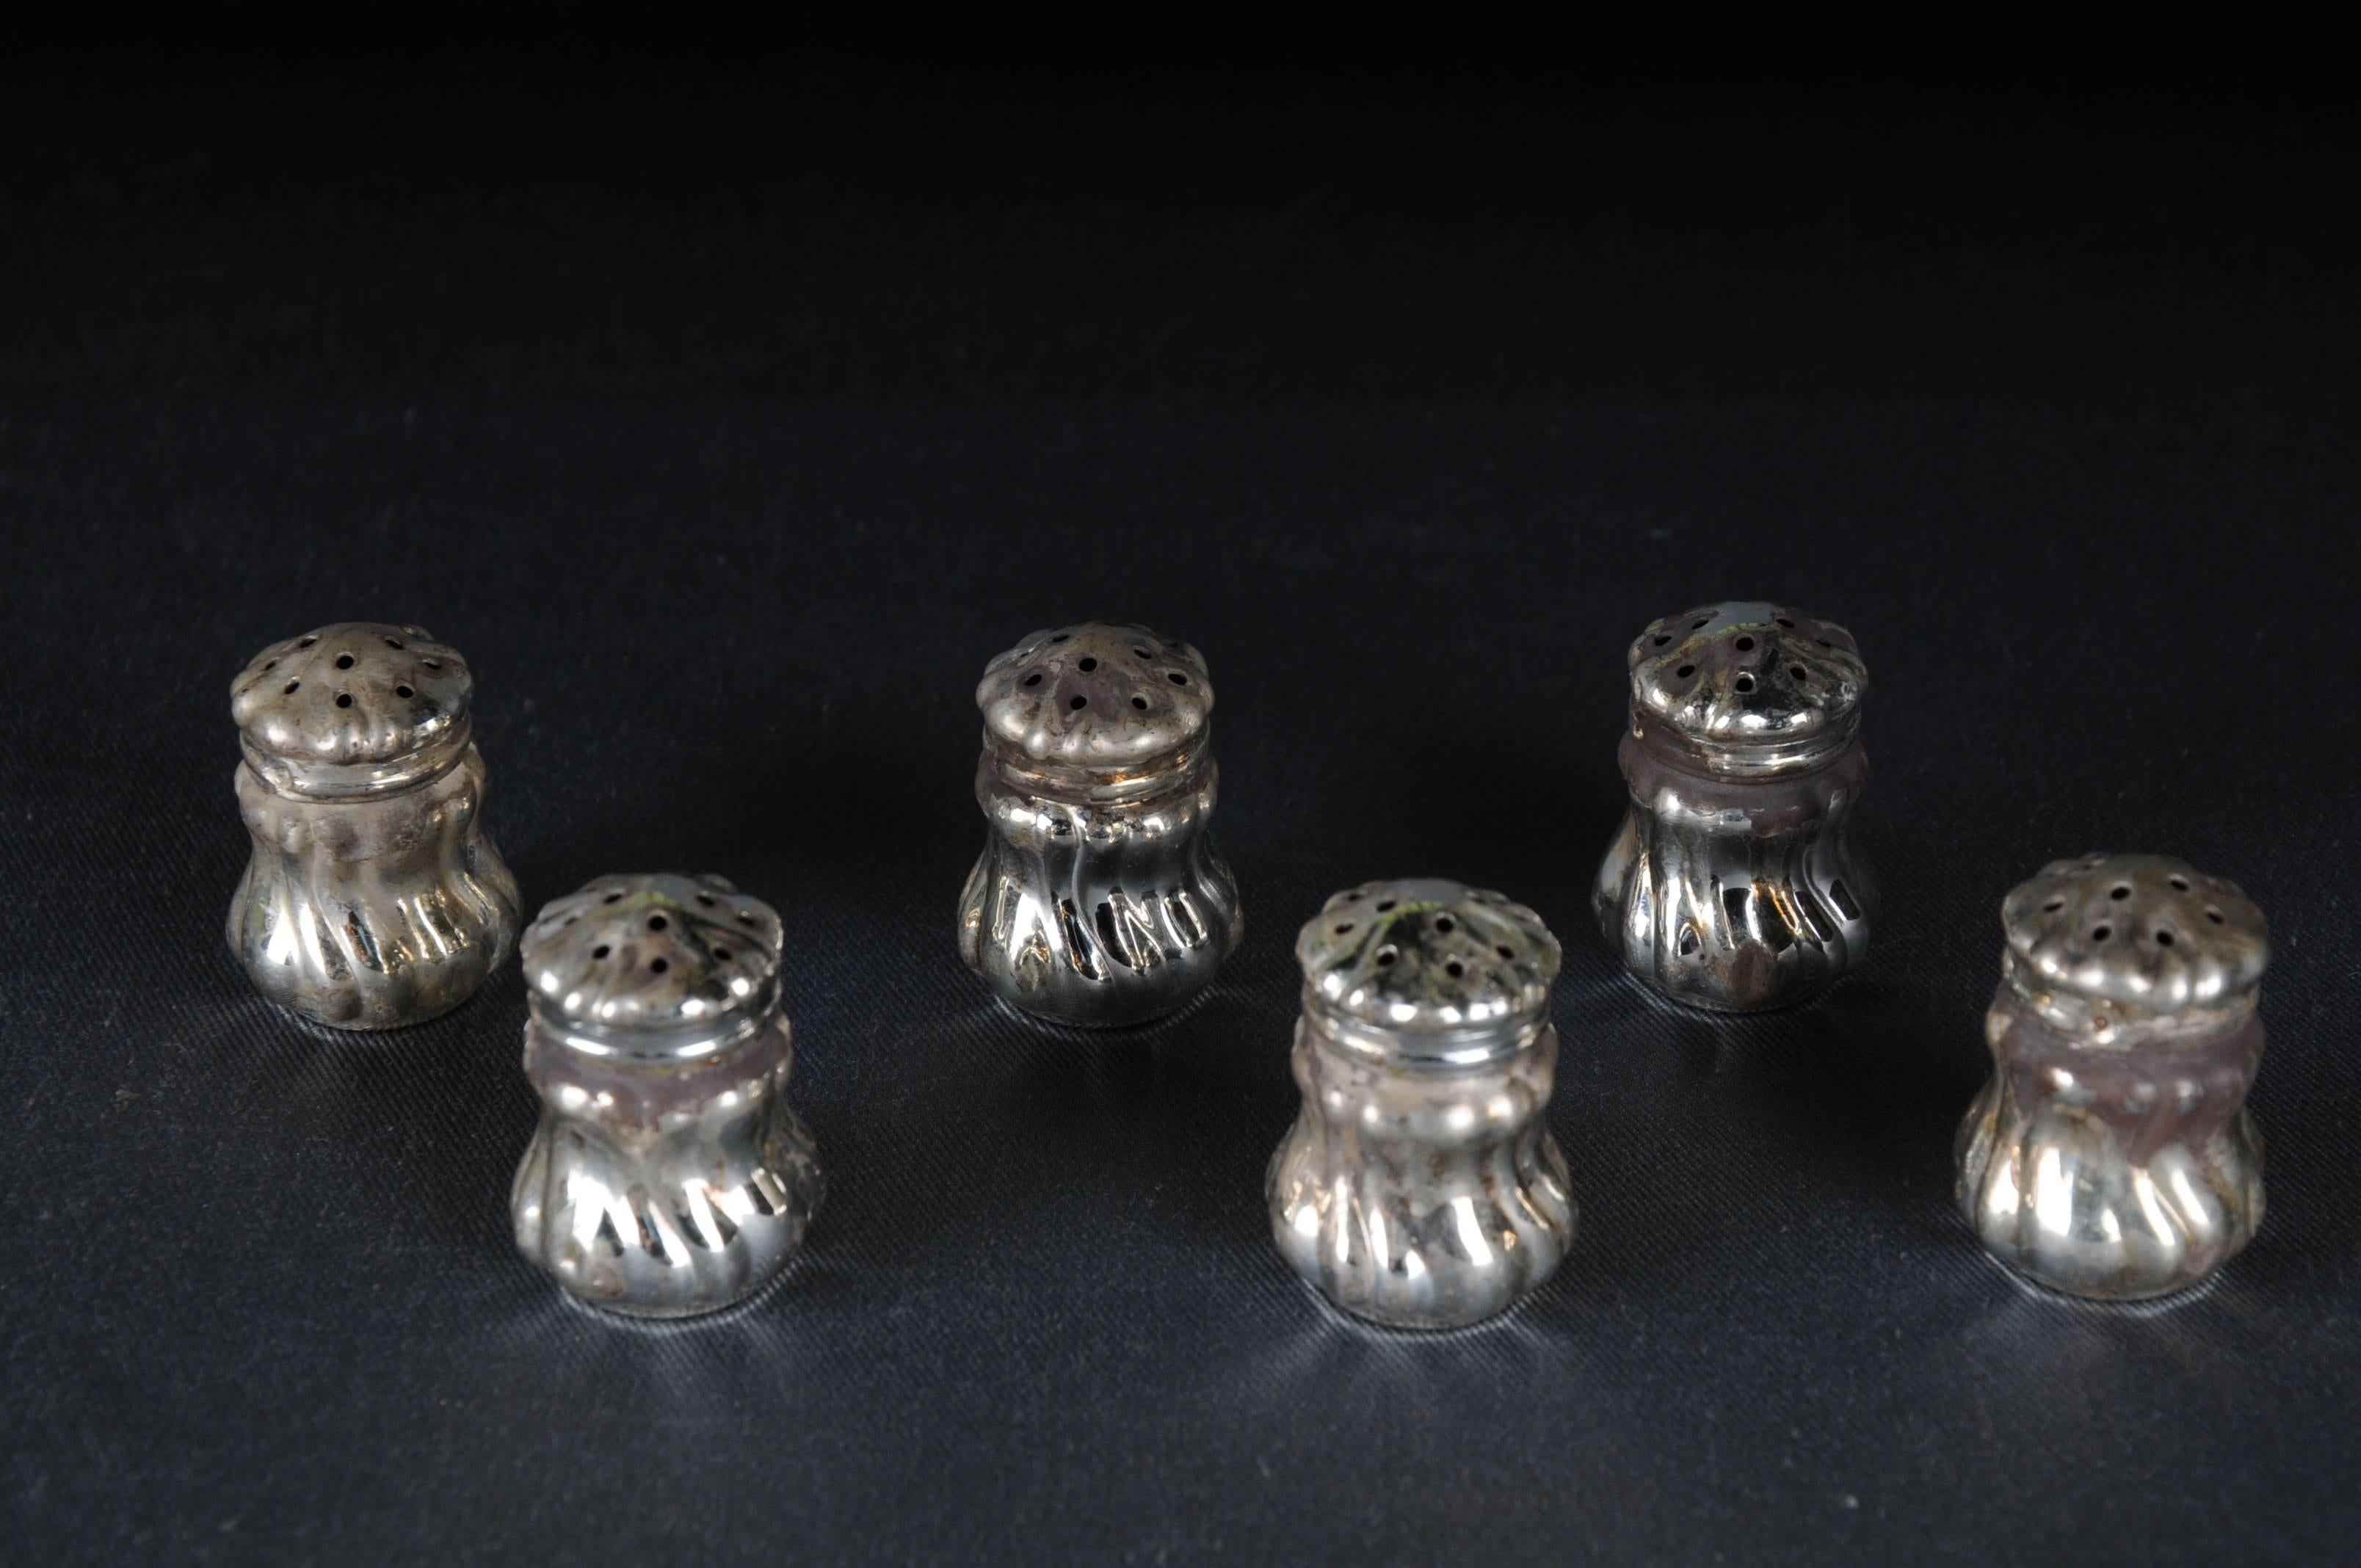 6 Cute Antique Salt Shaker 925 Sterling Silver Lion 

All 6 pieces weigh 72 grams